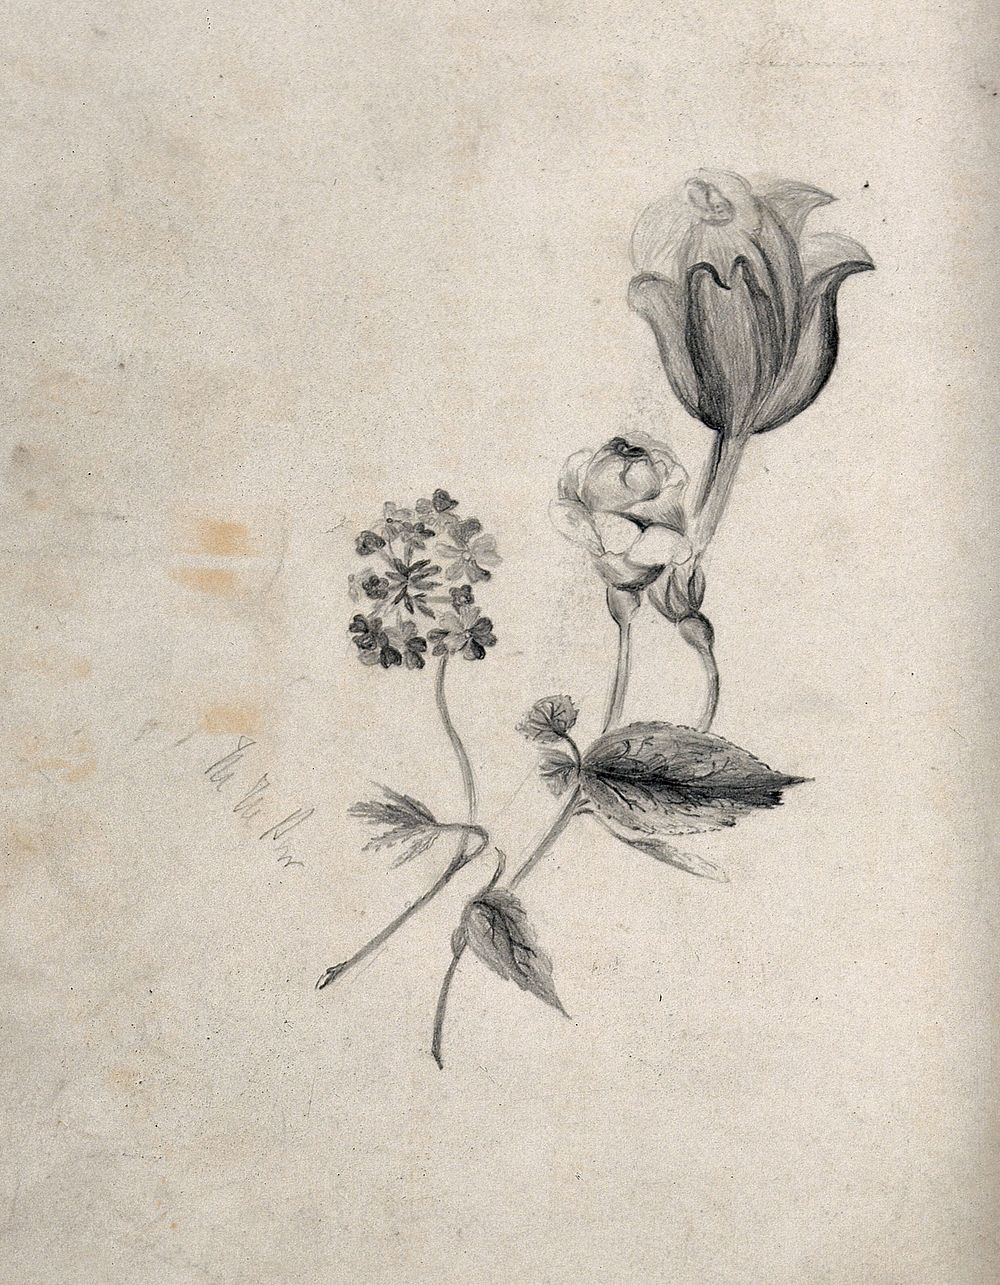 Three flowers, including a rose. Pencil drawing by M. M. Paw.